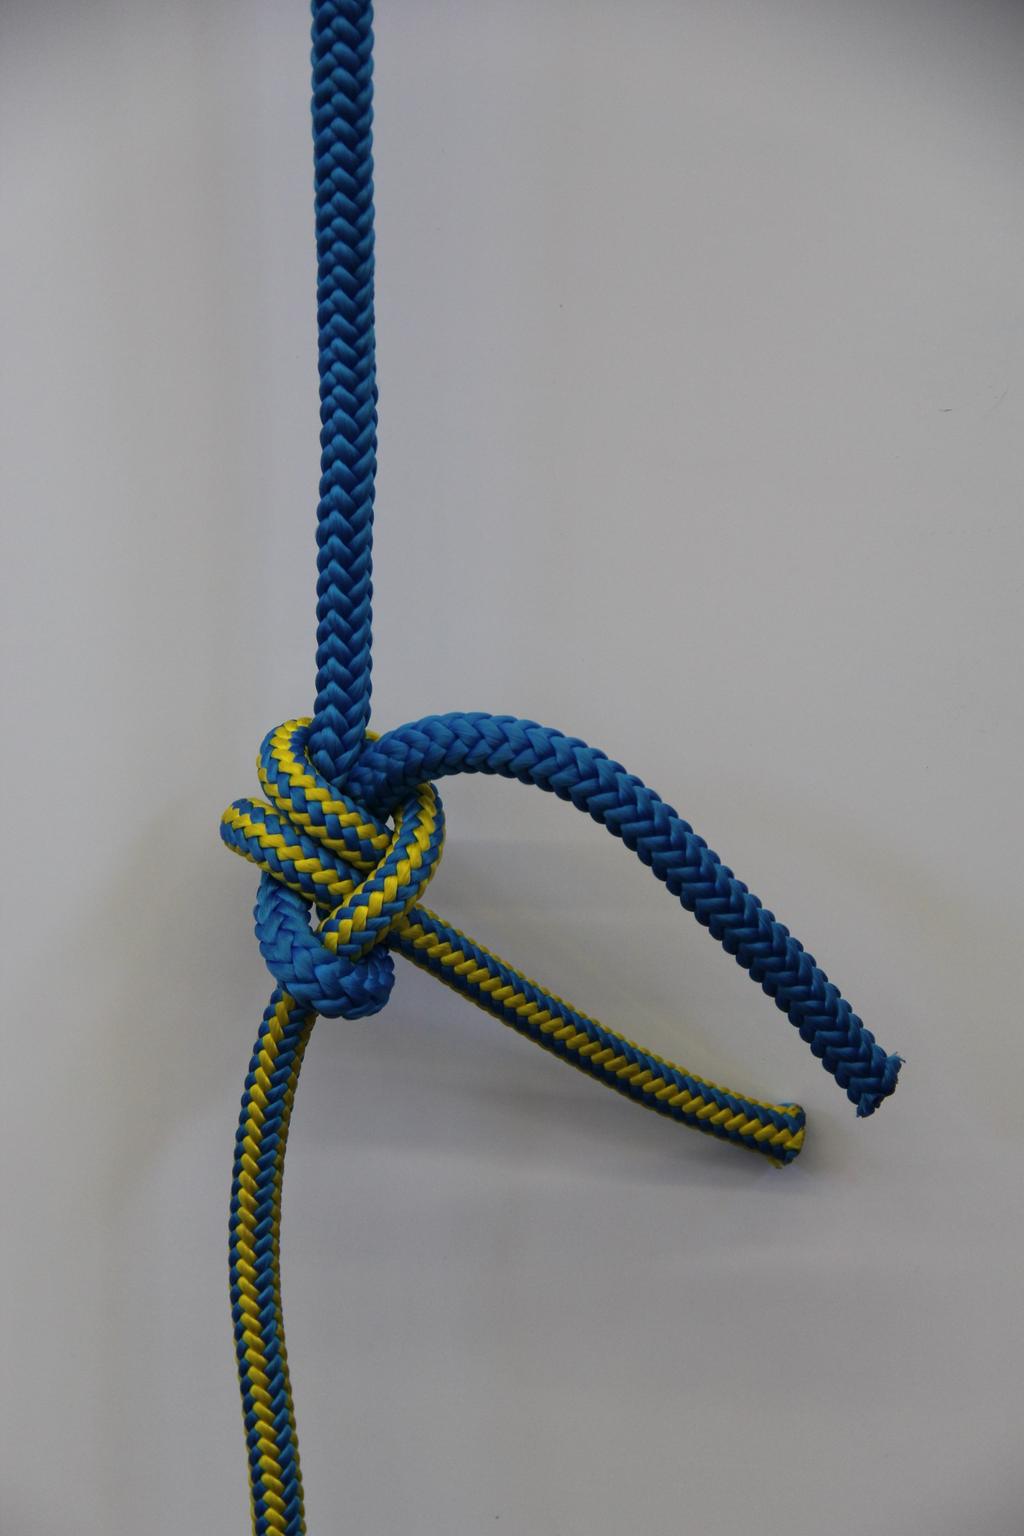 Double Sheet bend: often used to join two ropes together, in non-critical situations (sending a rigging rope to a climber in the tree).